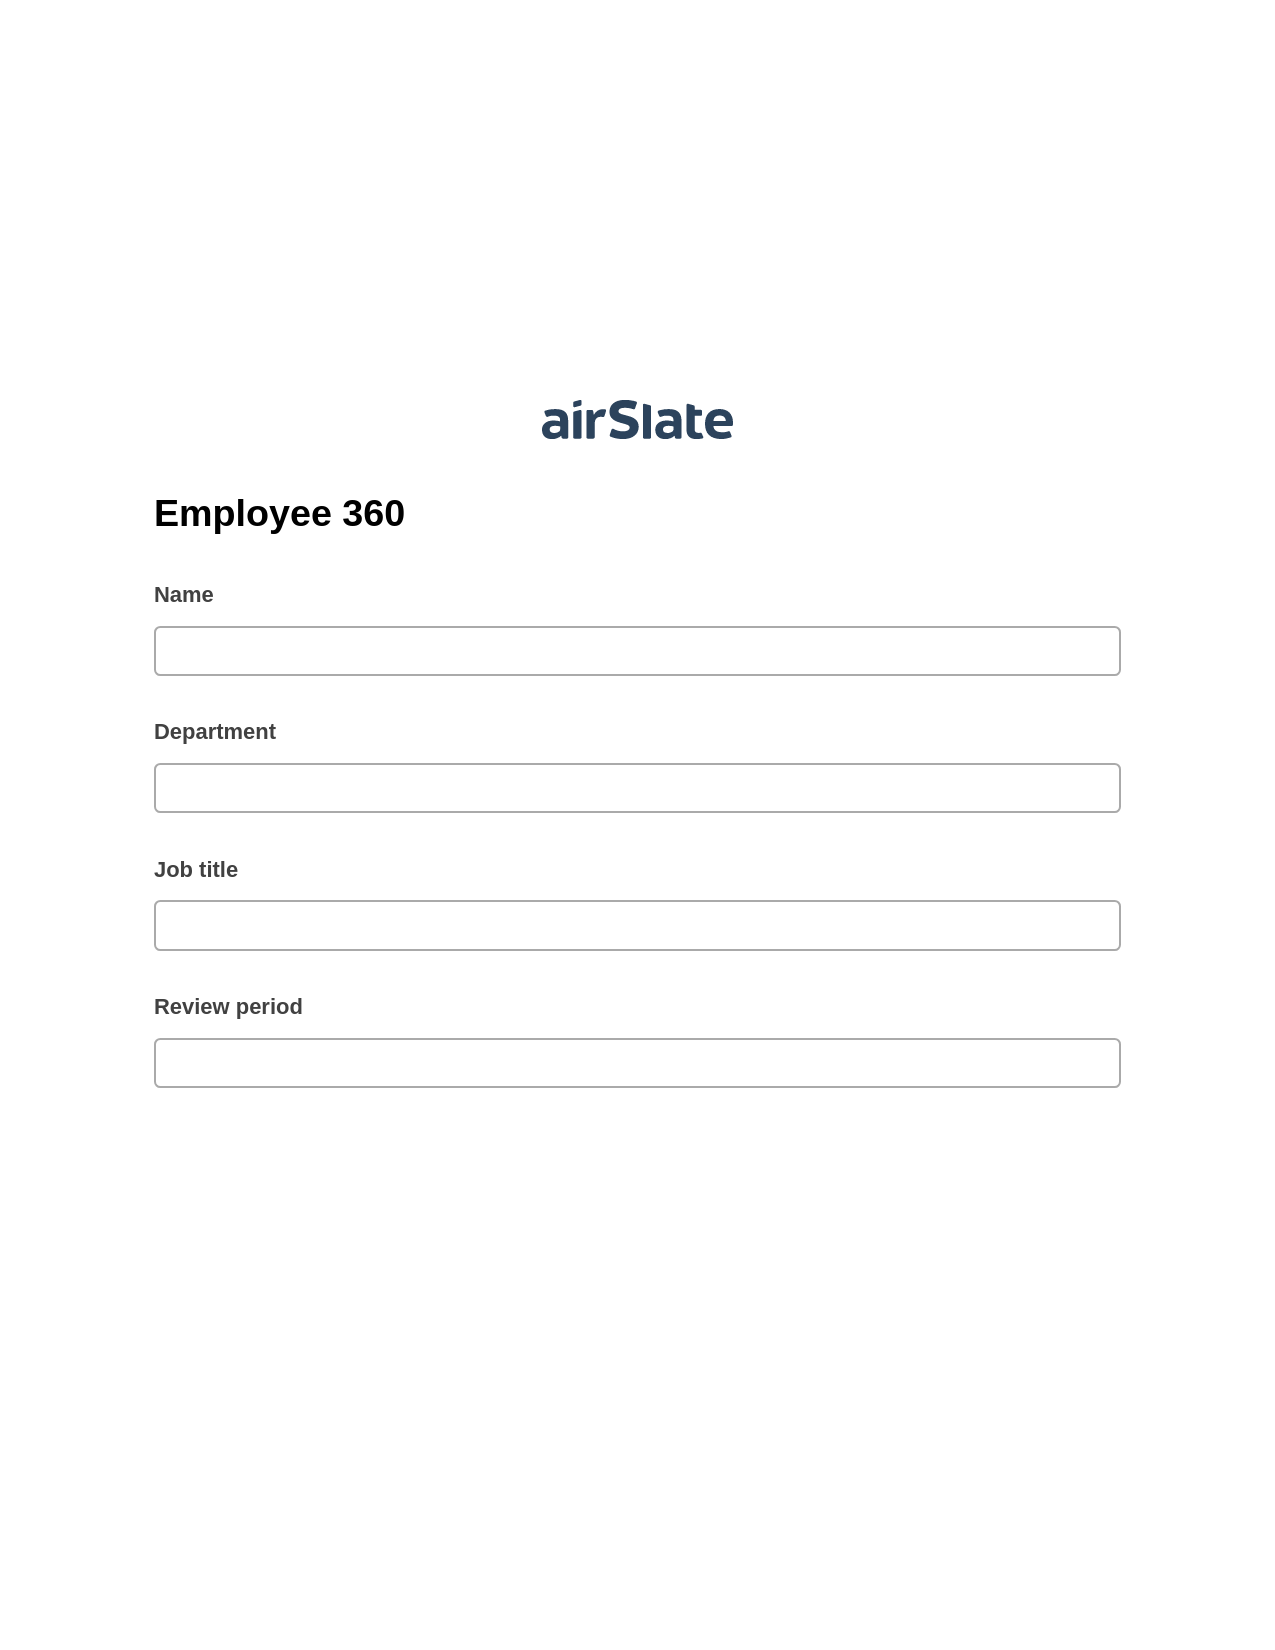 Employee 360 Pre-fill Document Bot, Create MS Dynamics 365 Records Bot, Archive to OneDrive Bot